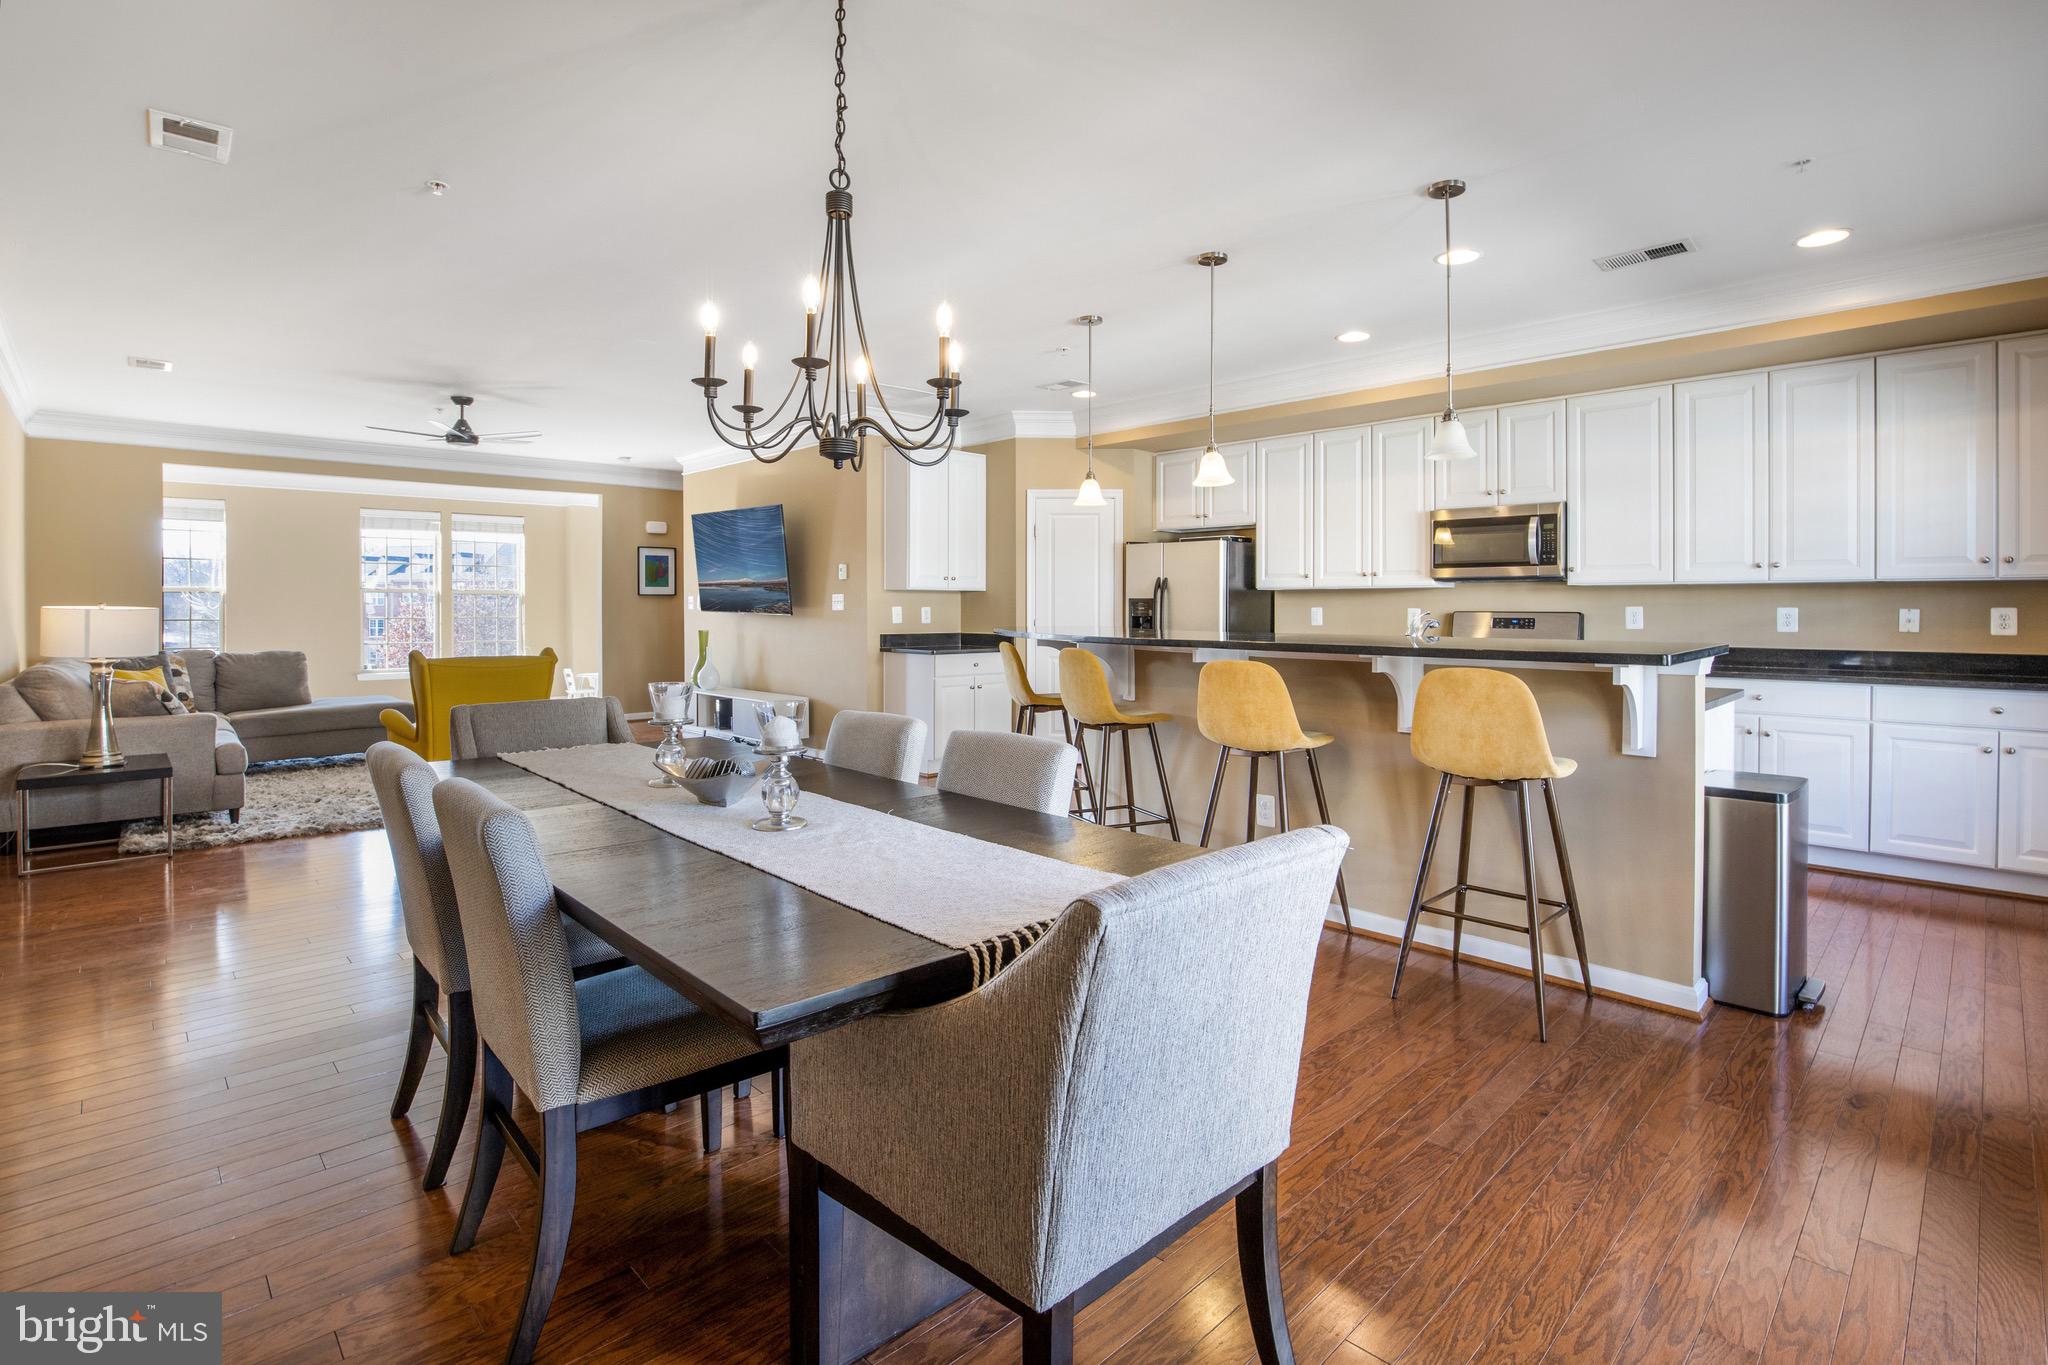 a dining room with stainless steel appliances kitchen island granite countertop a dining table chairs and view living room